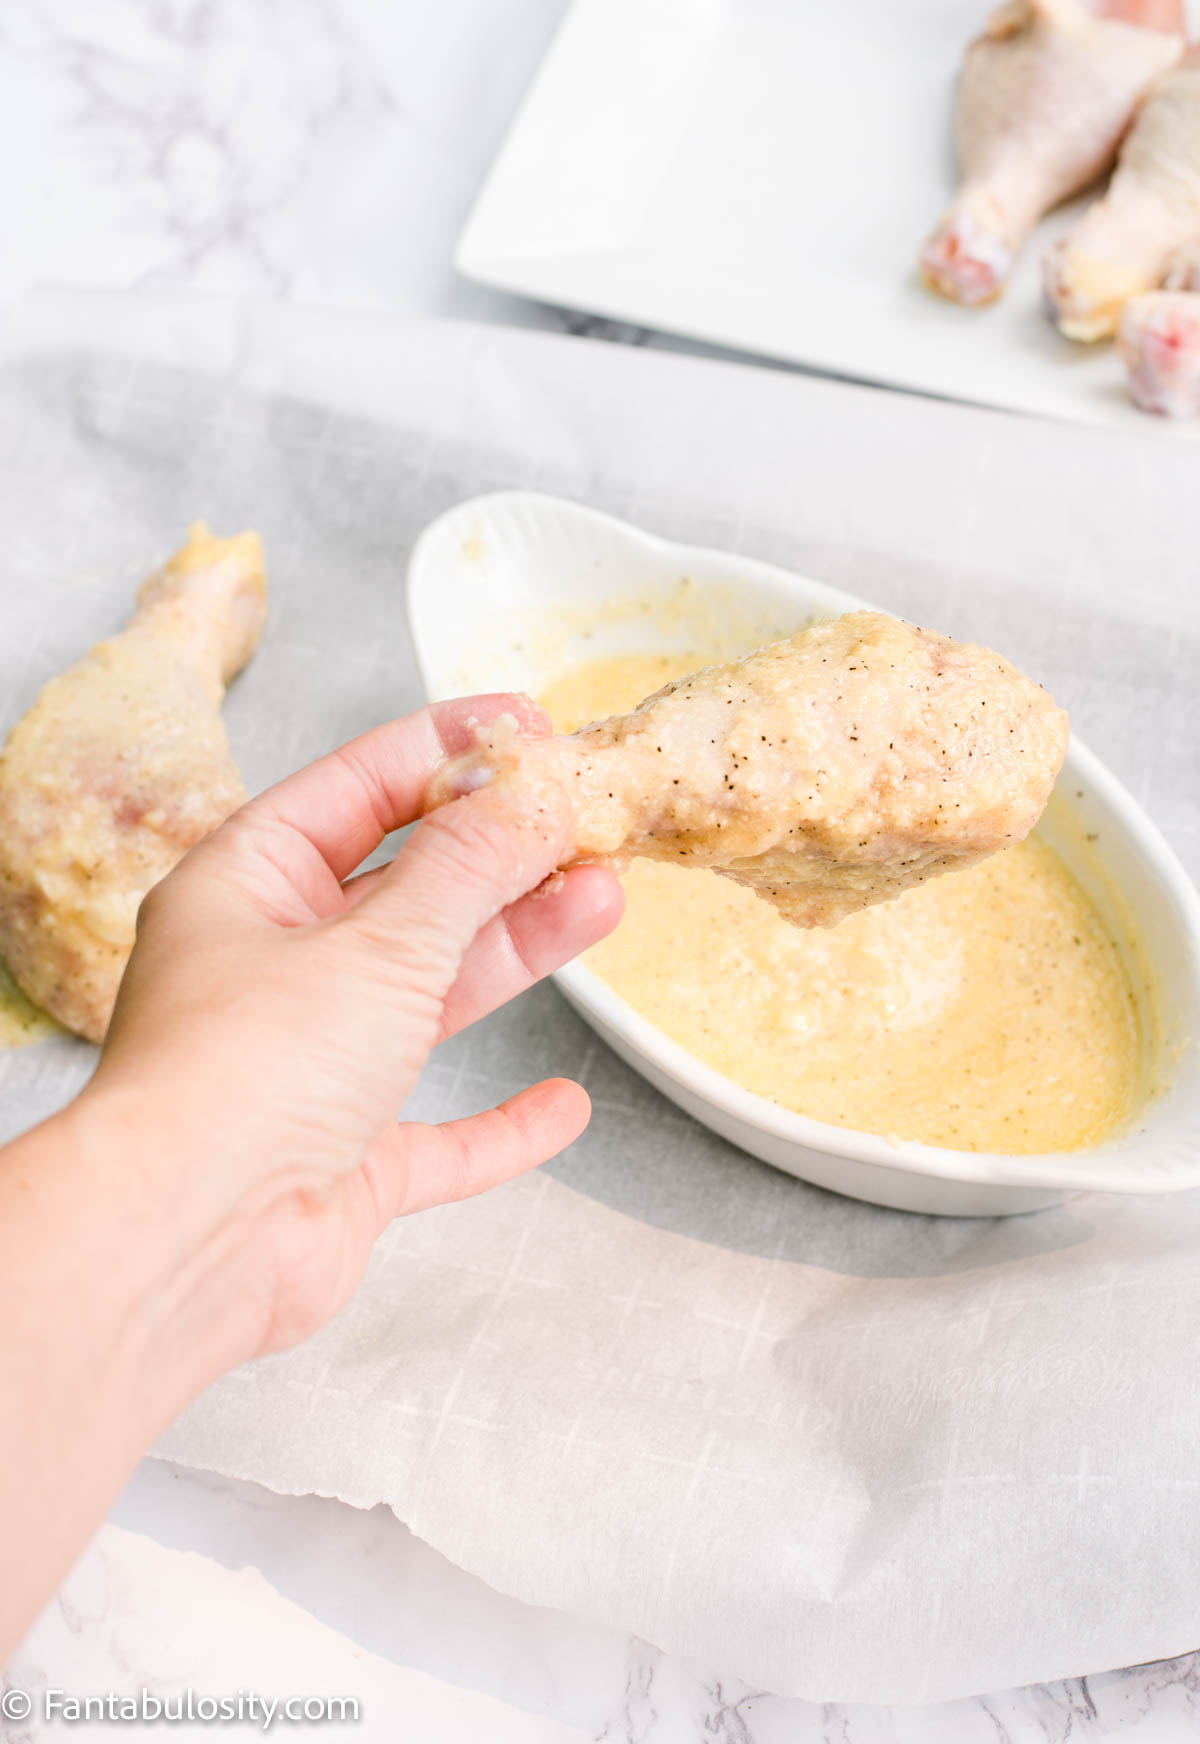 Fully cover chicken leg with garlic butter batter